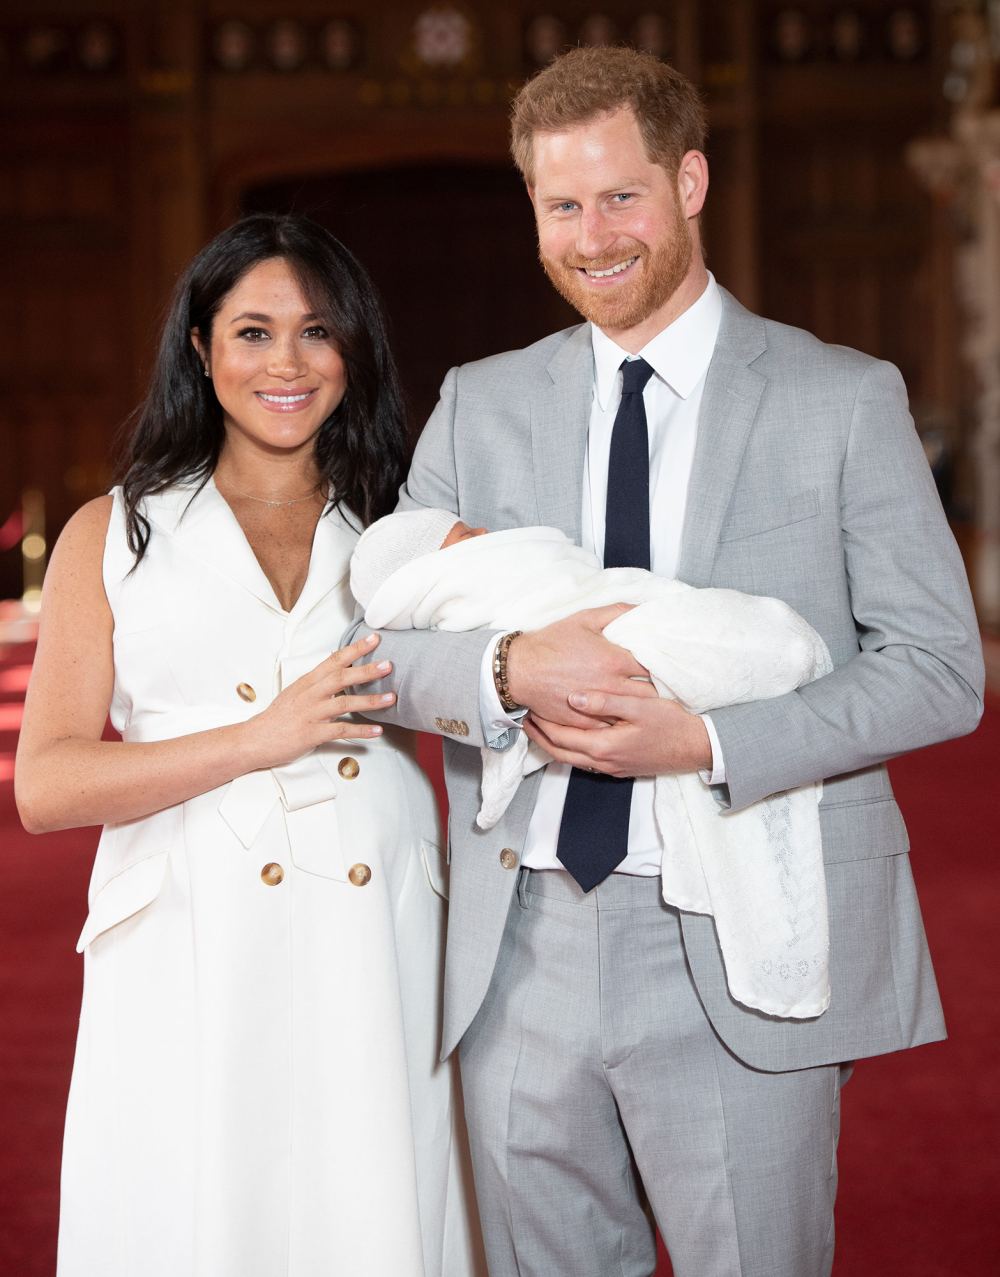 Prince Harry’s Nanny and Mentor Are Son Archie’s Godparents